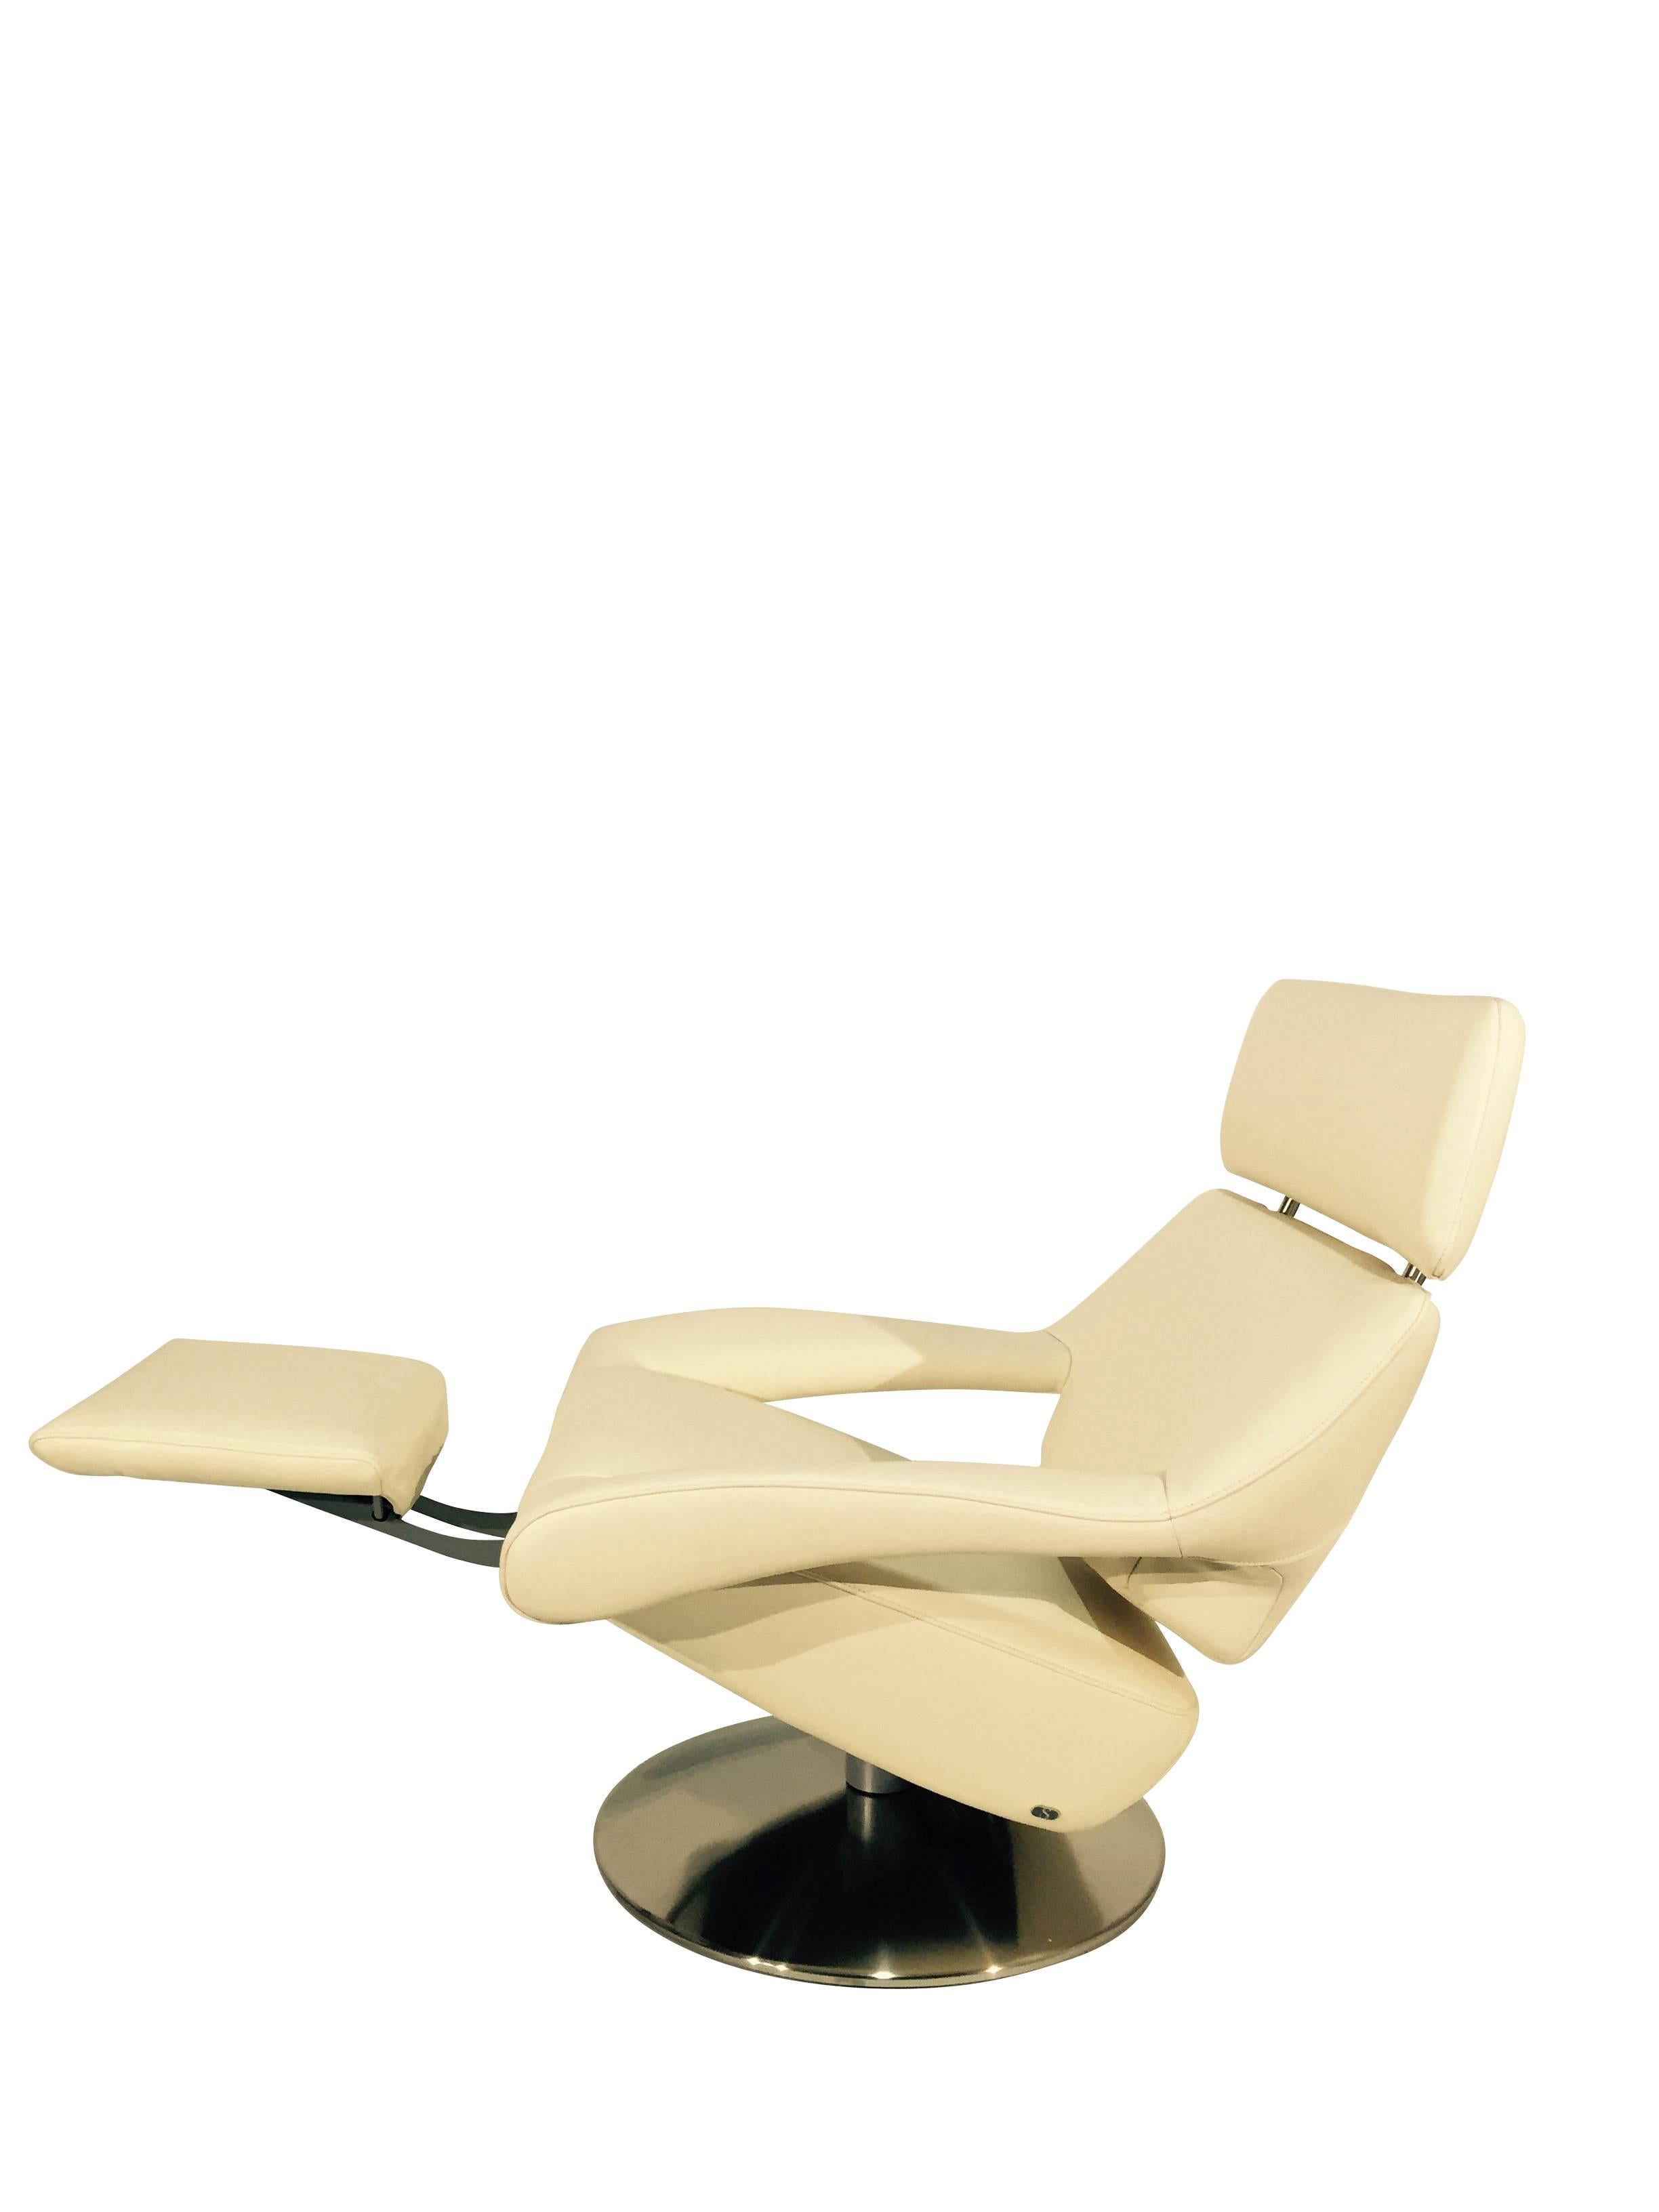 Swiss De Sede DS-255/11 Armchair in Leather Select Off-White For Sale